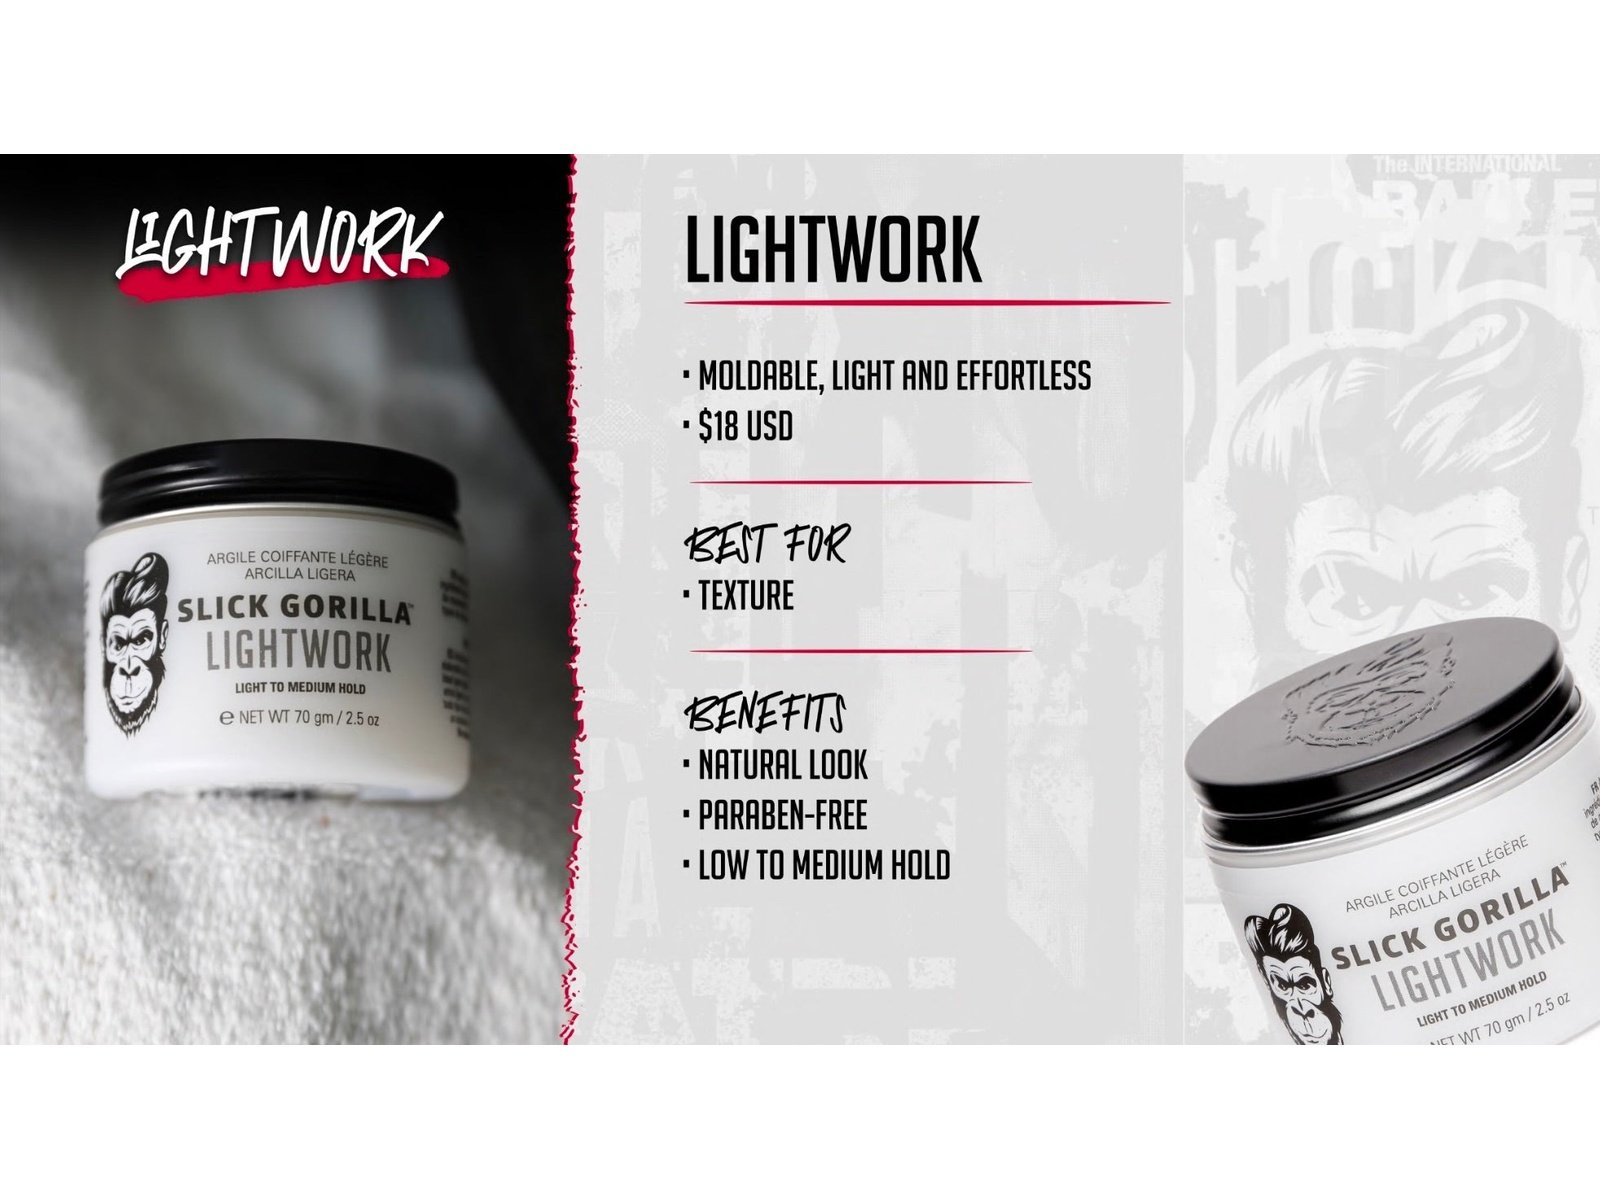 Load image into Gallery viewer, Slick Gorilla ~ Lightwork Hair Styling Pomade 2.5oz
